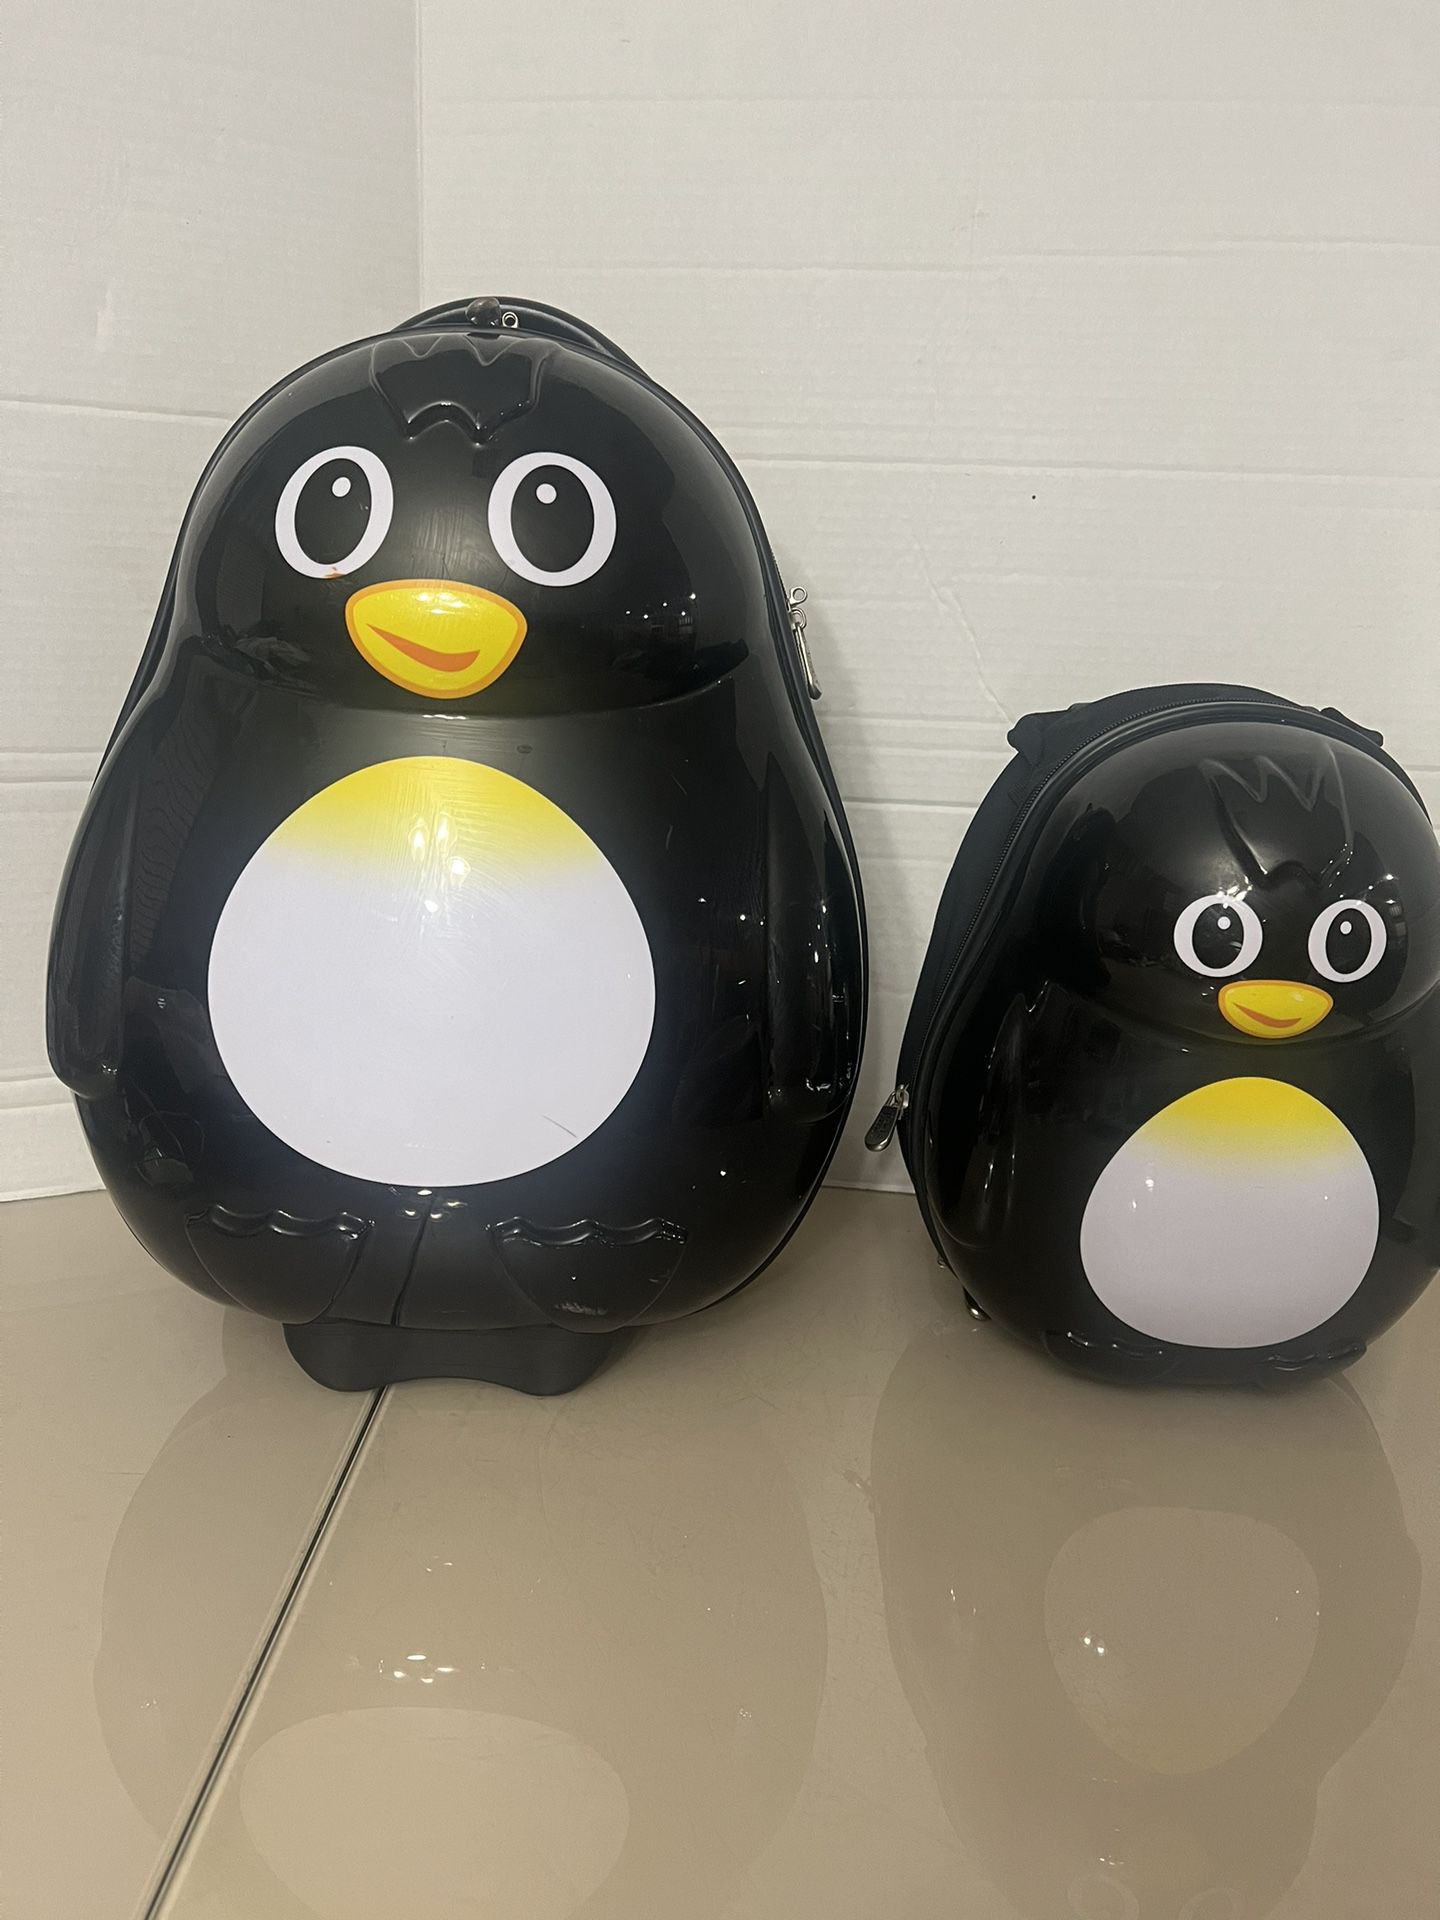 Travel Buddies Penguin Luggage Backpack Hardside Carry-On Rolling Luggage-2pc. Pre owned in good structural condition. Cosmetically, there are some no